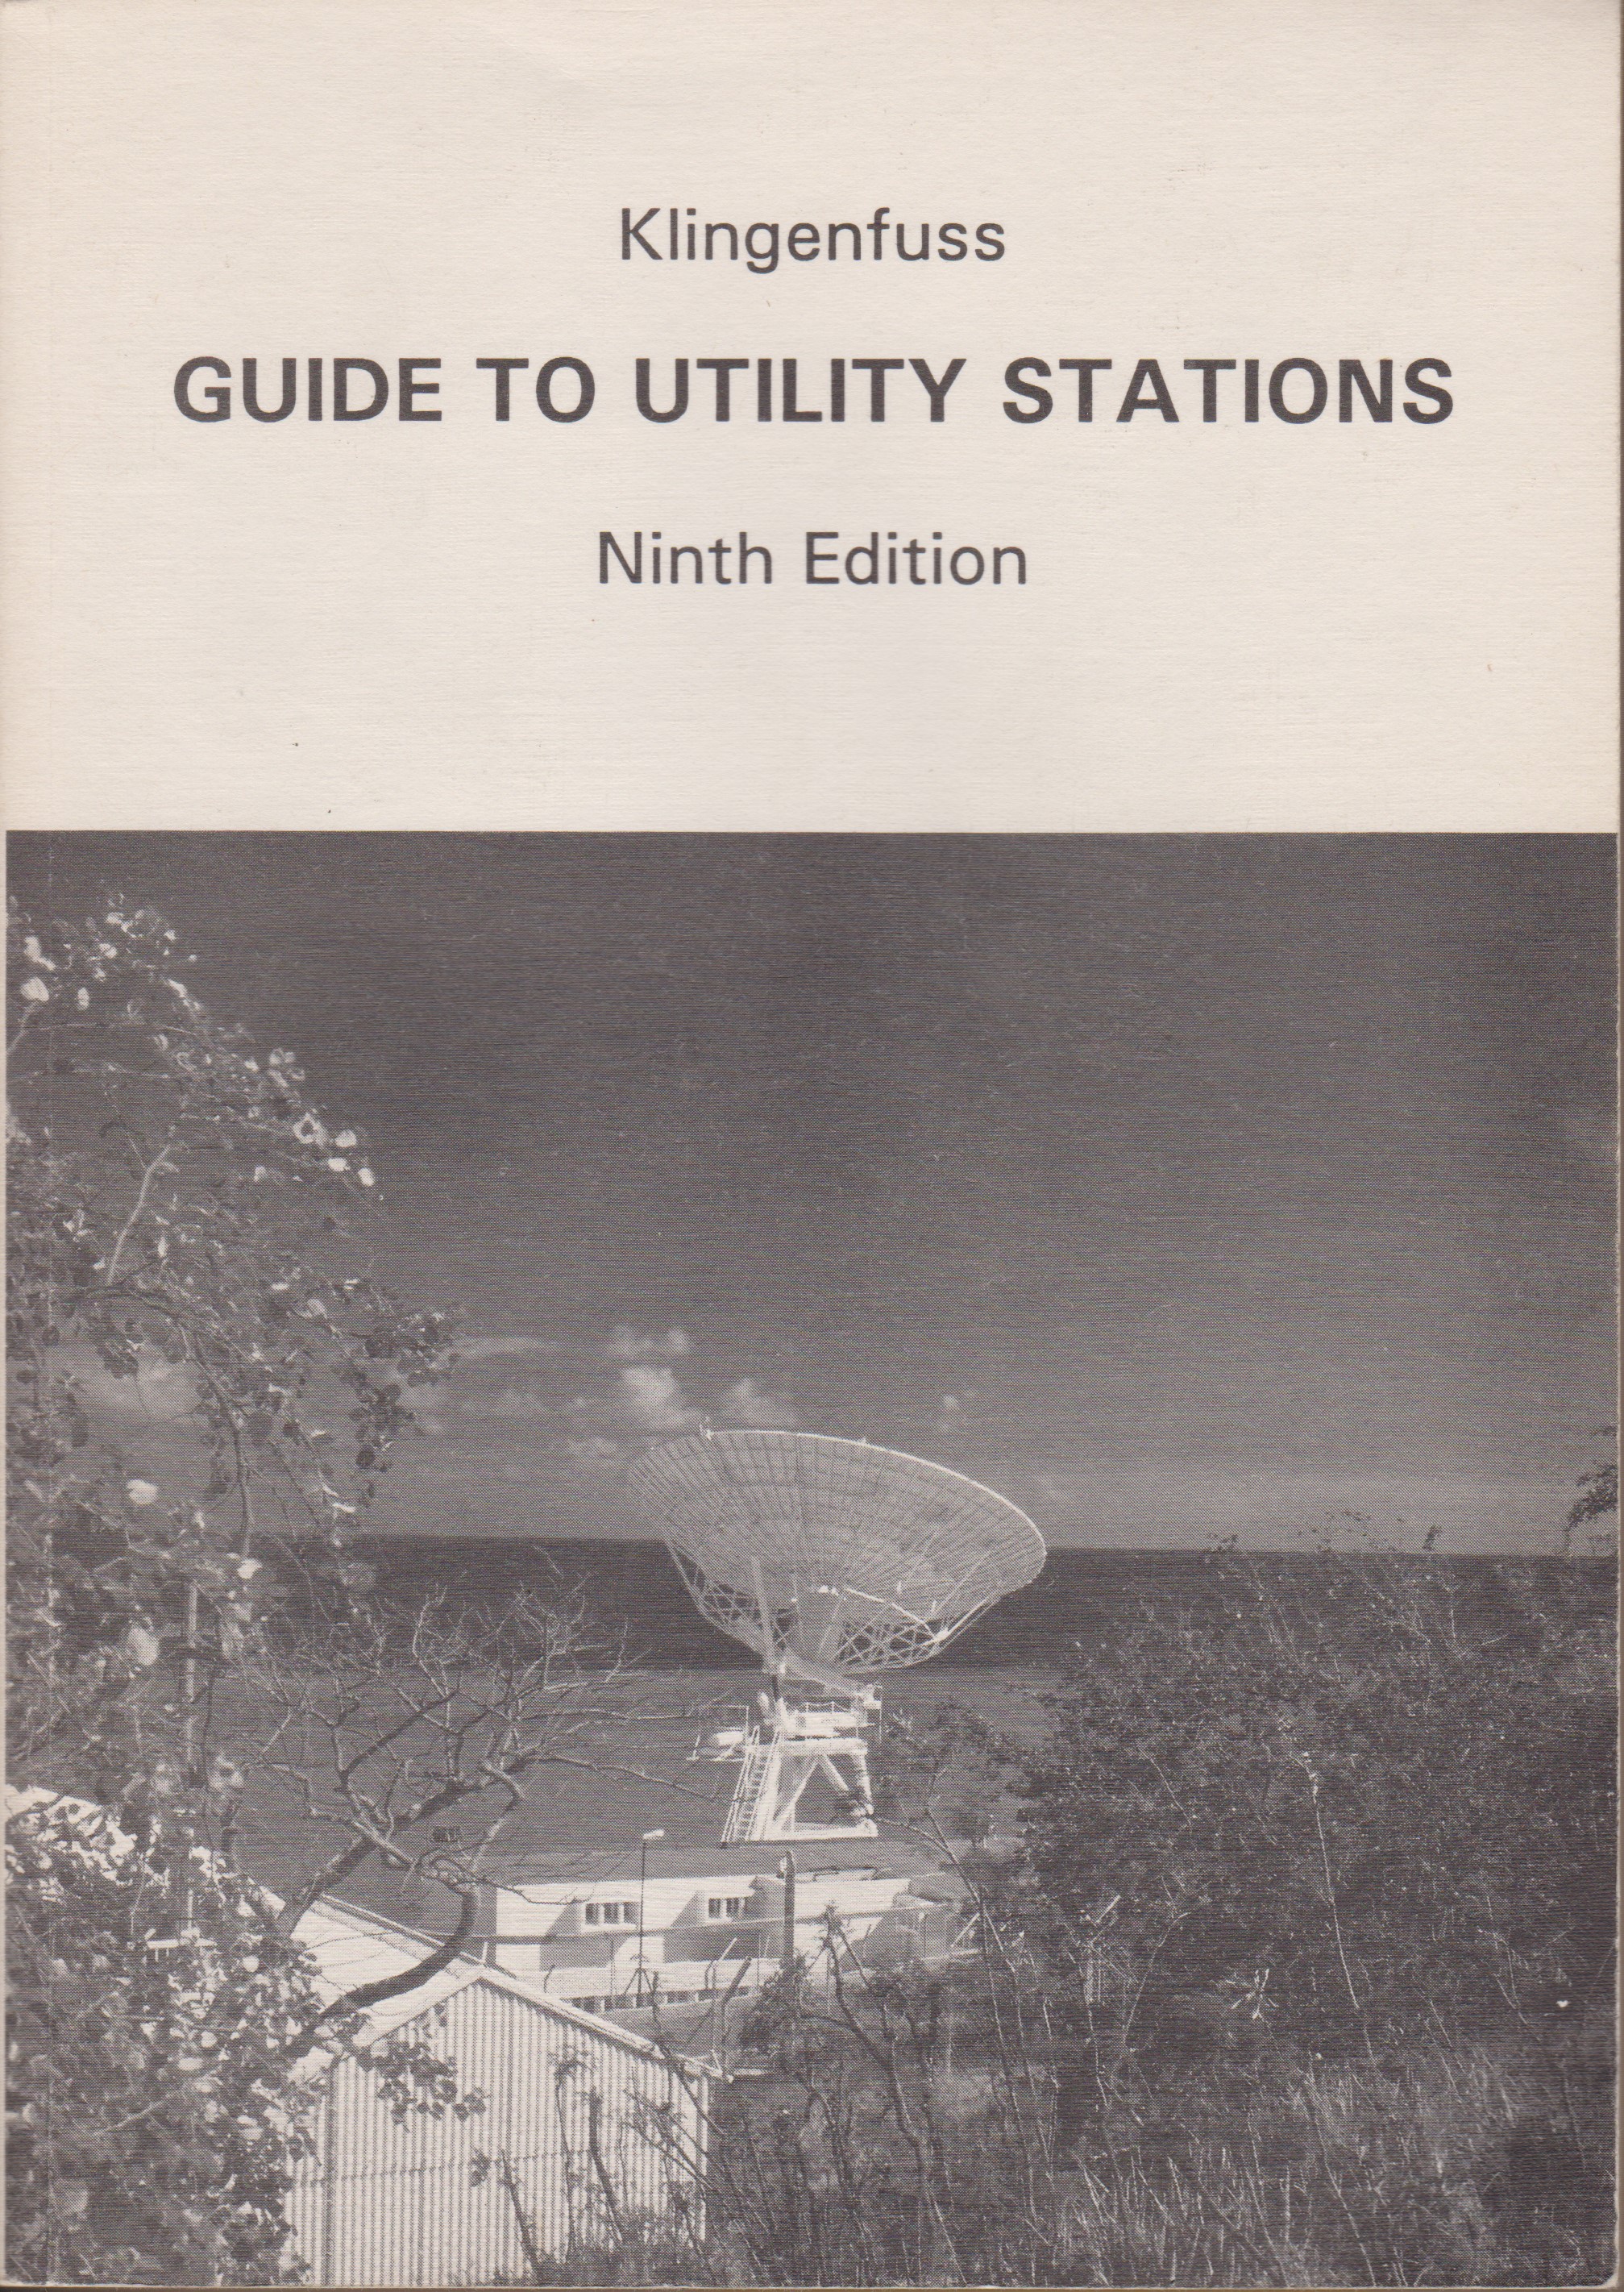 Klingenfuss Guide to Utility Stations